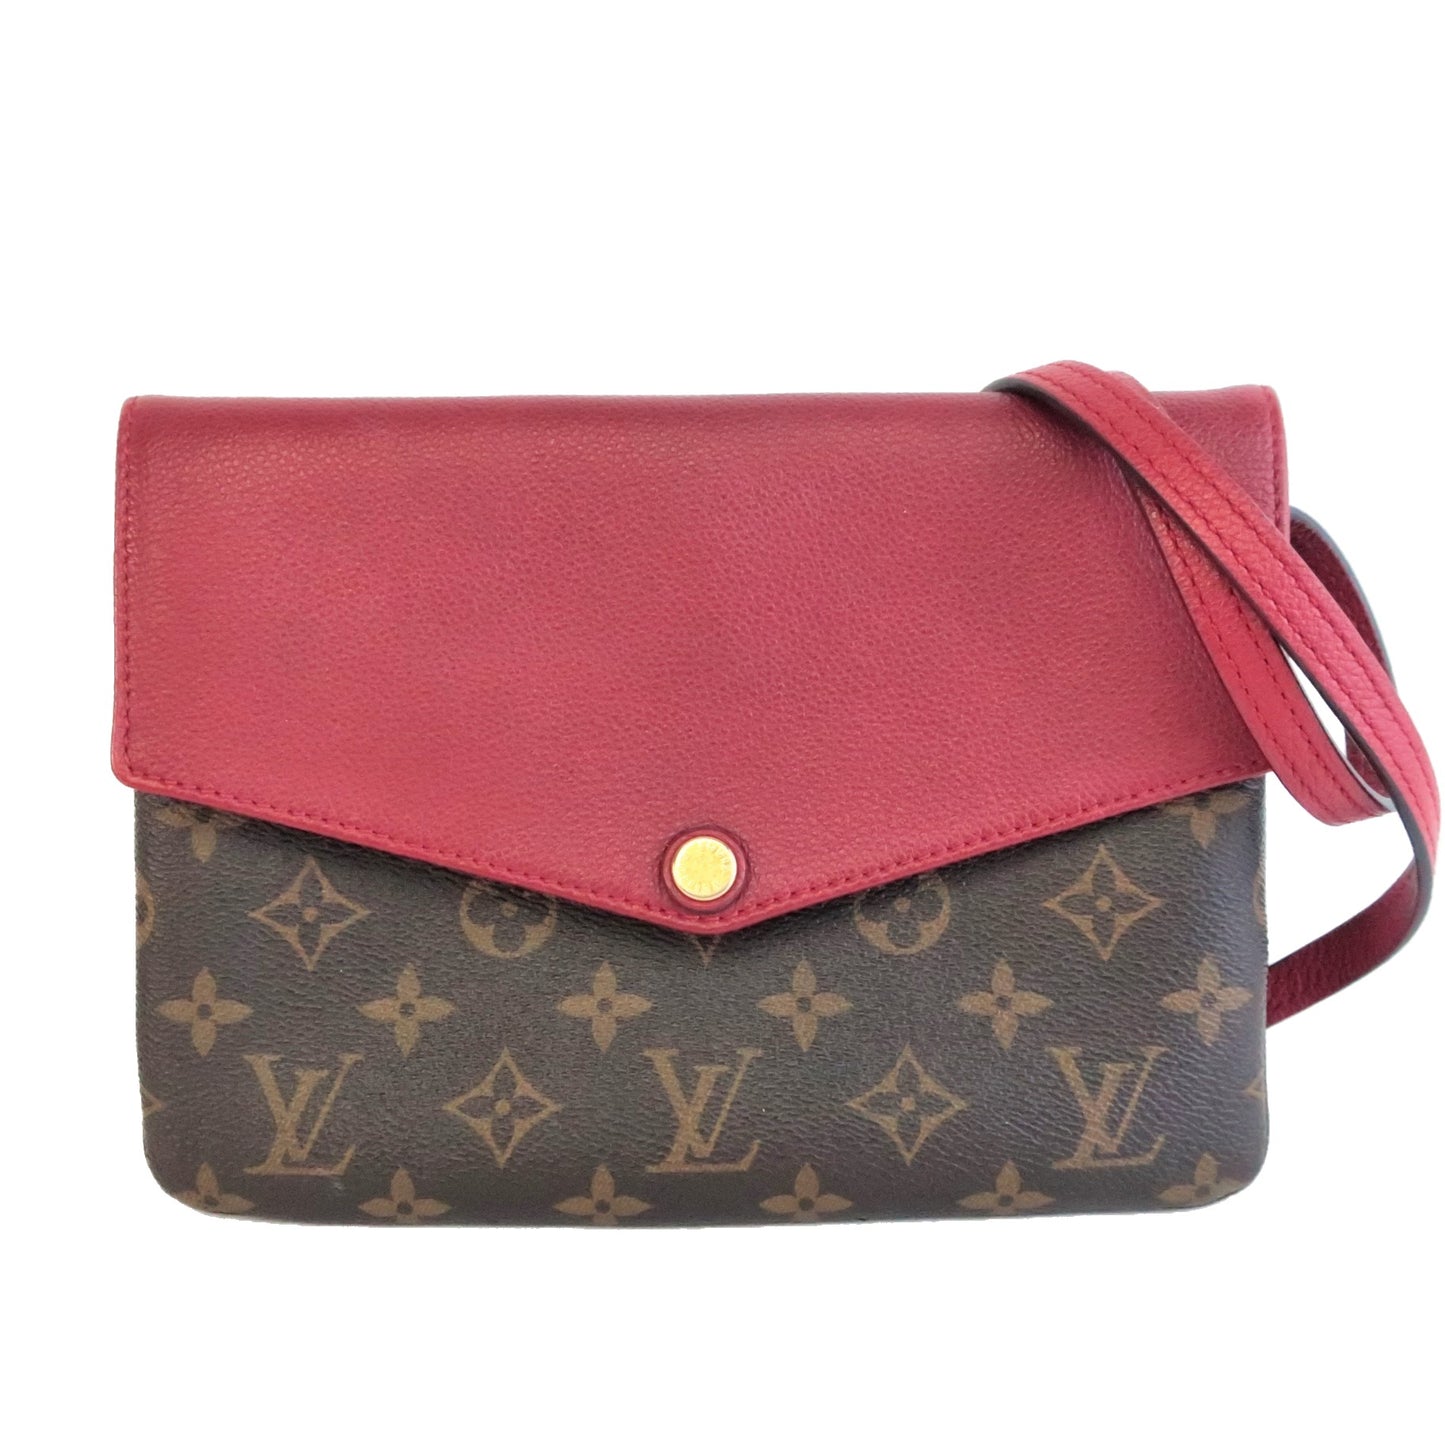 Louis Vuitton Twice Crossbody Brown Canvas/Leather for sale online